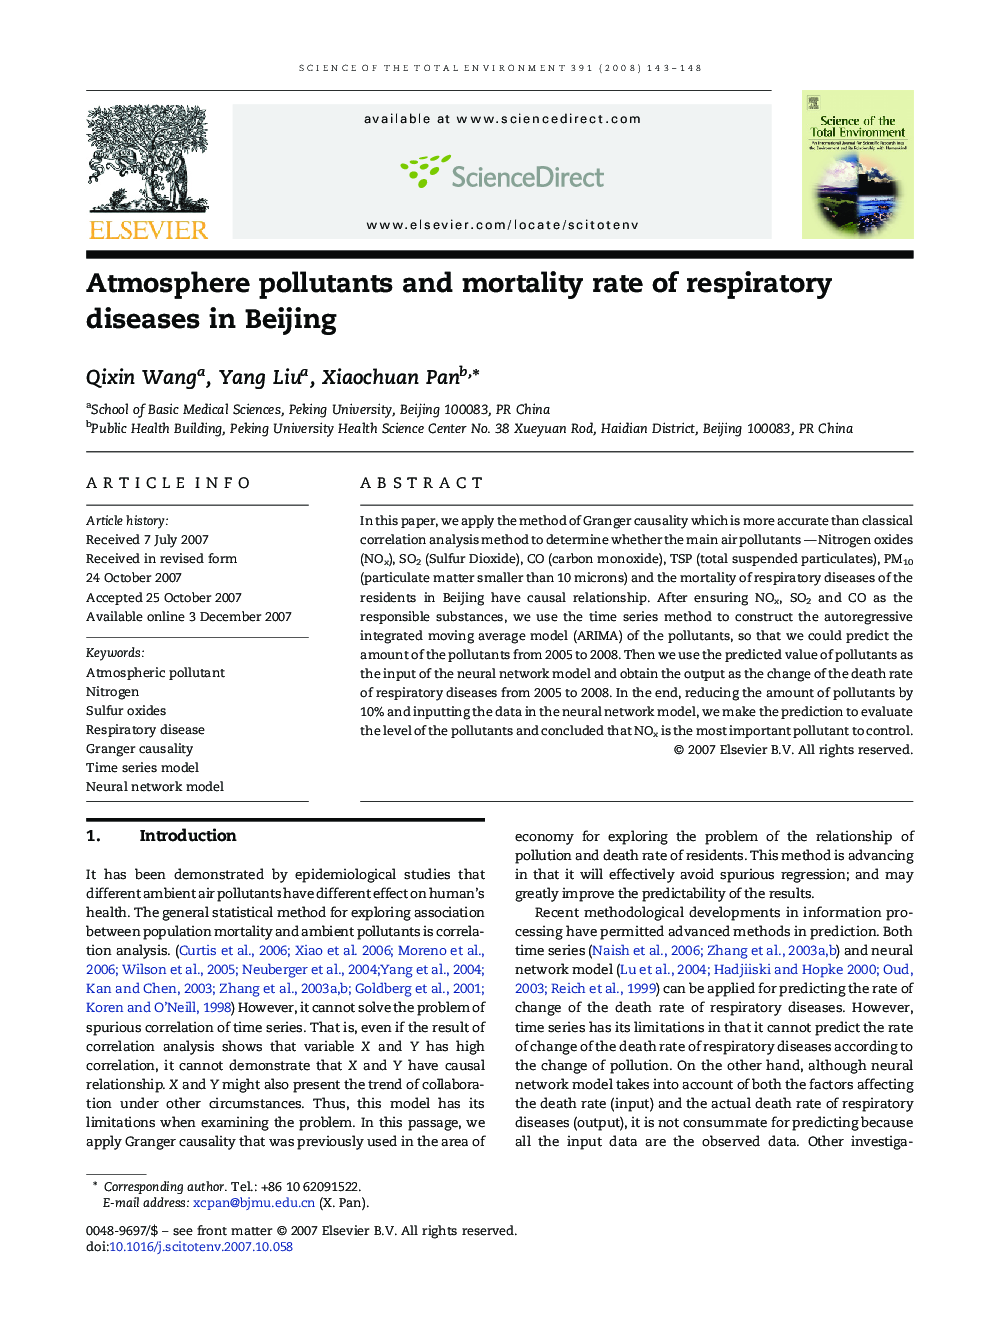 Atmosphere pollutants and mortality rate of respiratory diseases in Beijing